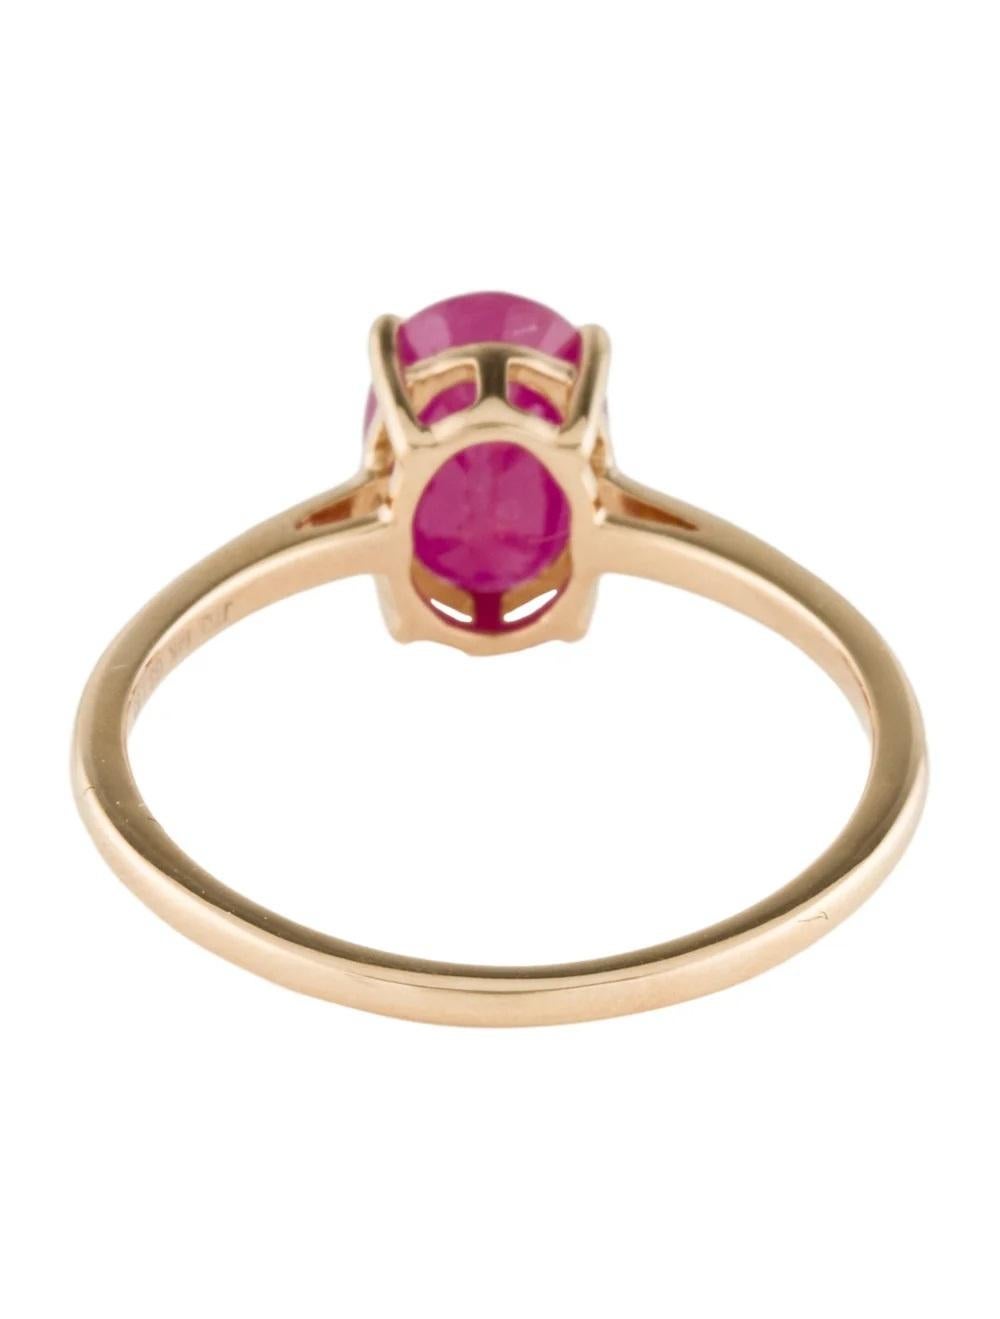 14K Ruby Cocktail Ring, 1.41ct, Size 7 - Classic Design, Timeless Elegance In New Condition For Sale In Holtsville, NY